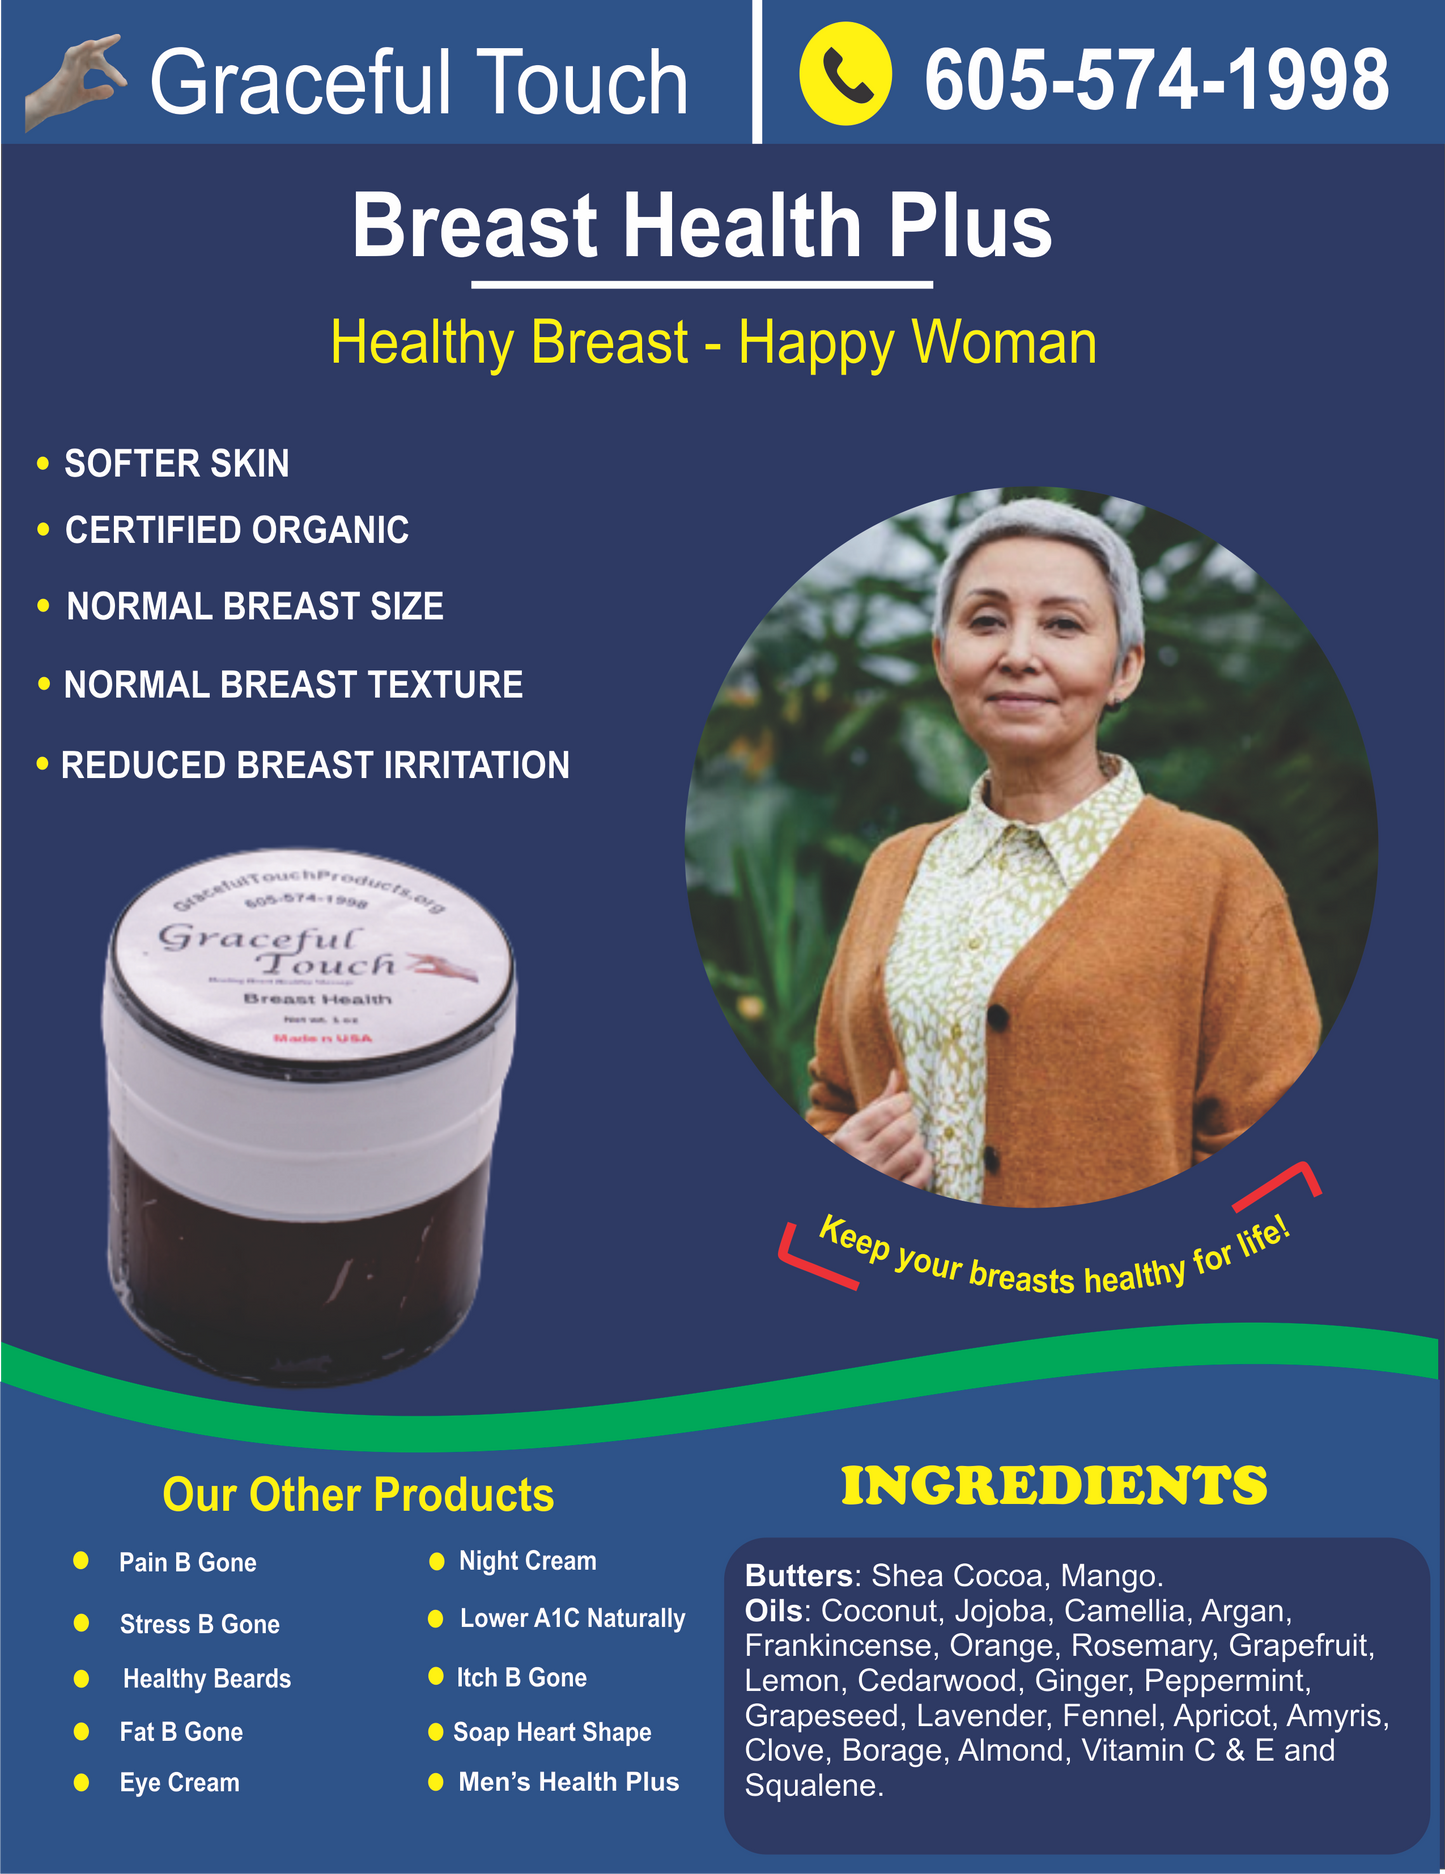 Breast Healthy Cream: Cream for breast enlargement and health